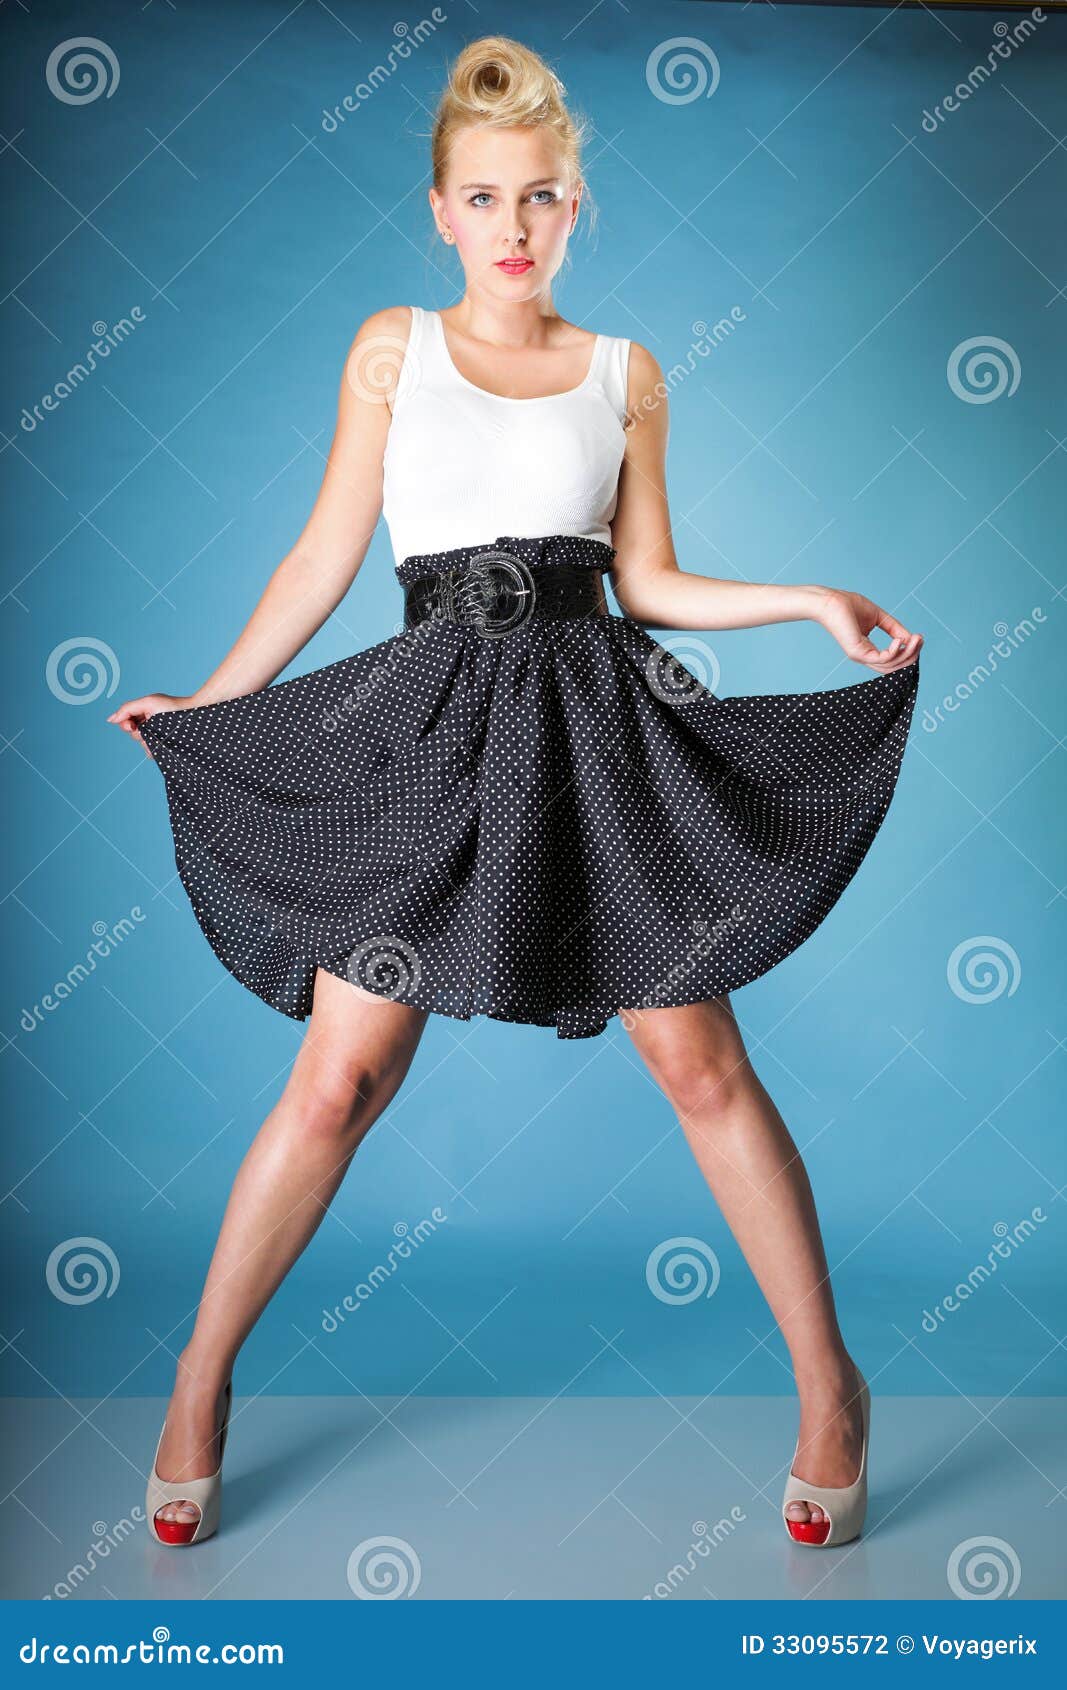 Pin-up Blonde Girl in Full Length Stock Photo - Image of body, appeal ...